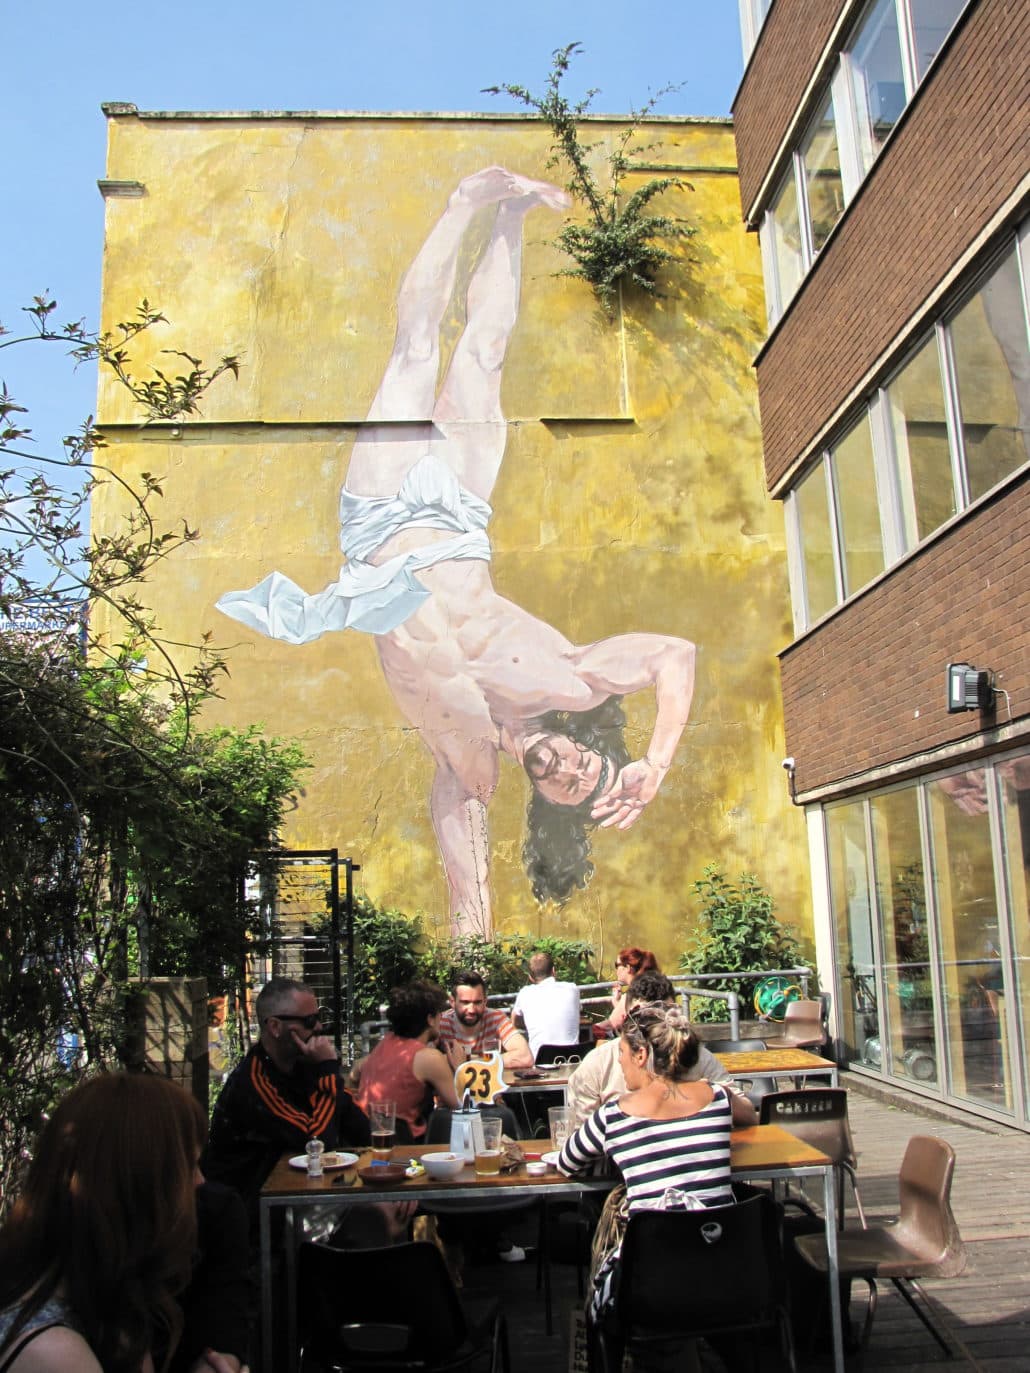 A giant mural dubbed "Breakdancing Jesus" adorns a building in downtown Bristol